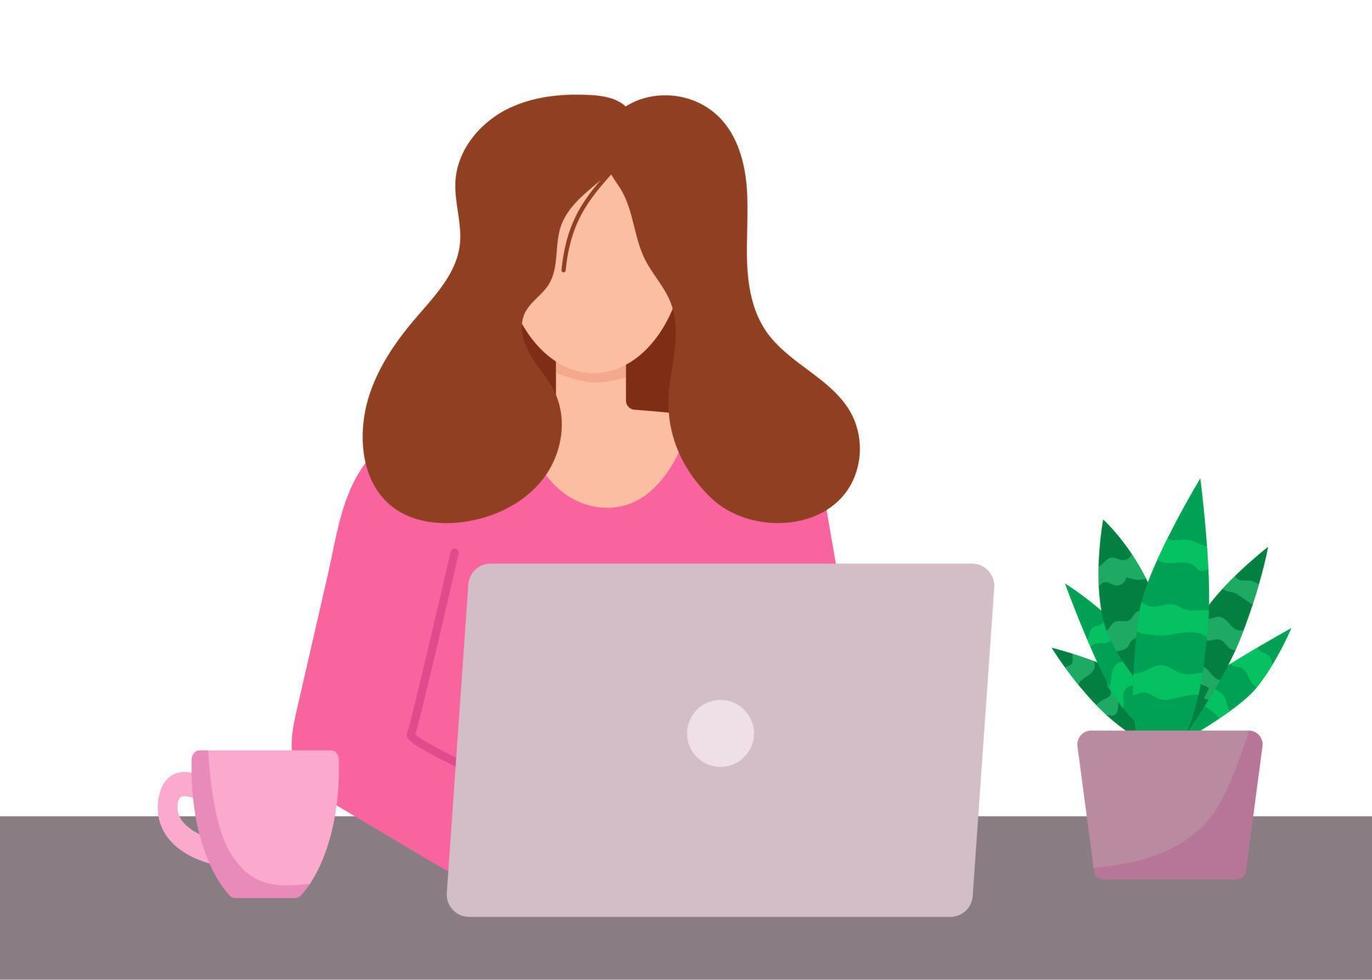 Young woman with long dark hair works with laptop. Working and education from home concept. Office employee. Faceless illustration. Print for web, advertising or social media vector